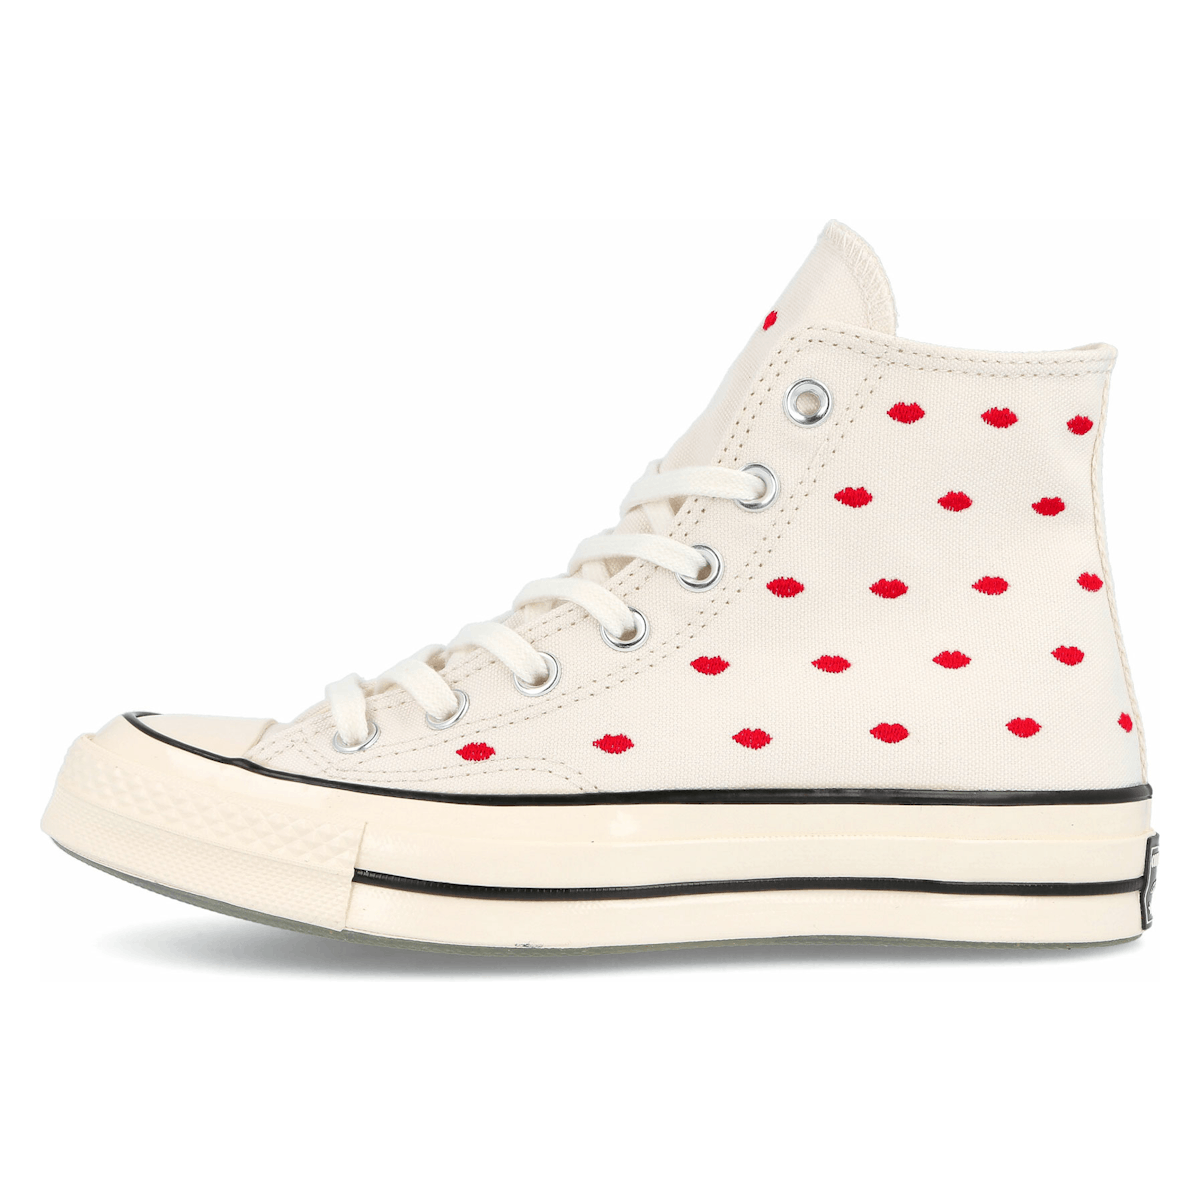 Converse Chuck Taylor All-Star 70 Hi Embroidered Lips Vintage White